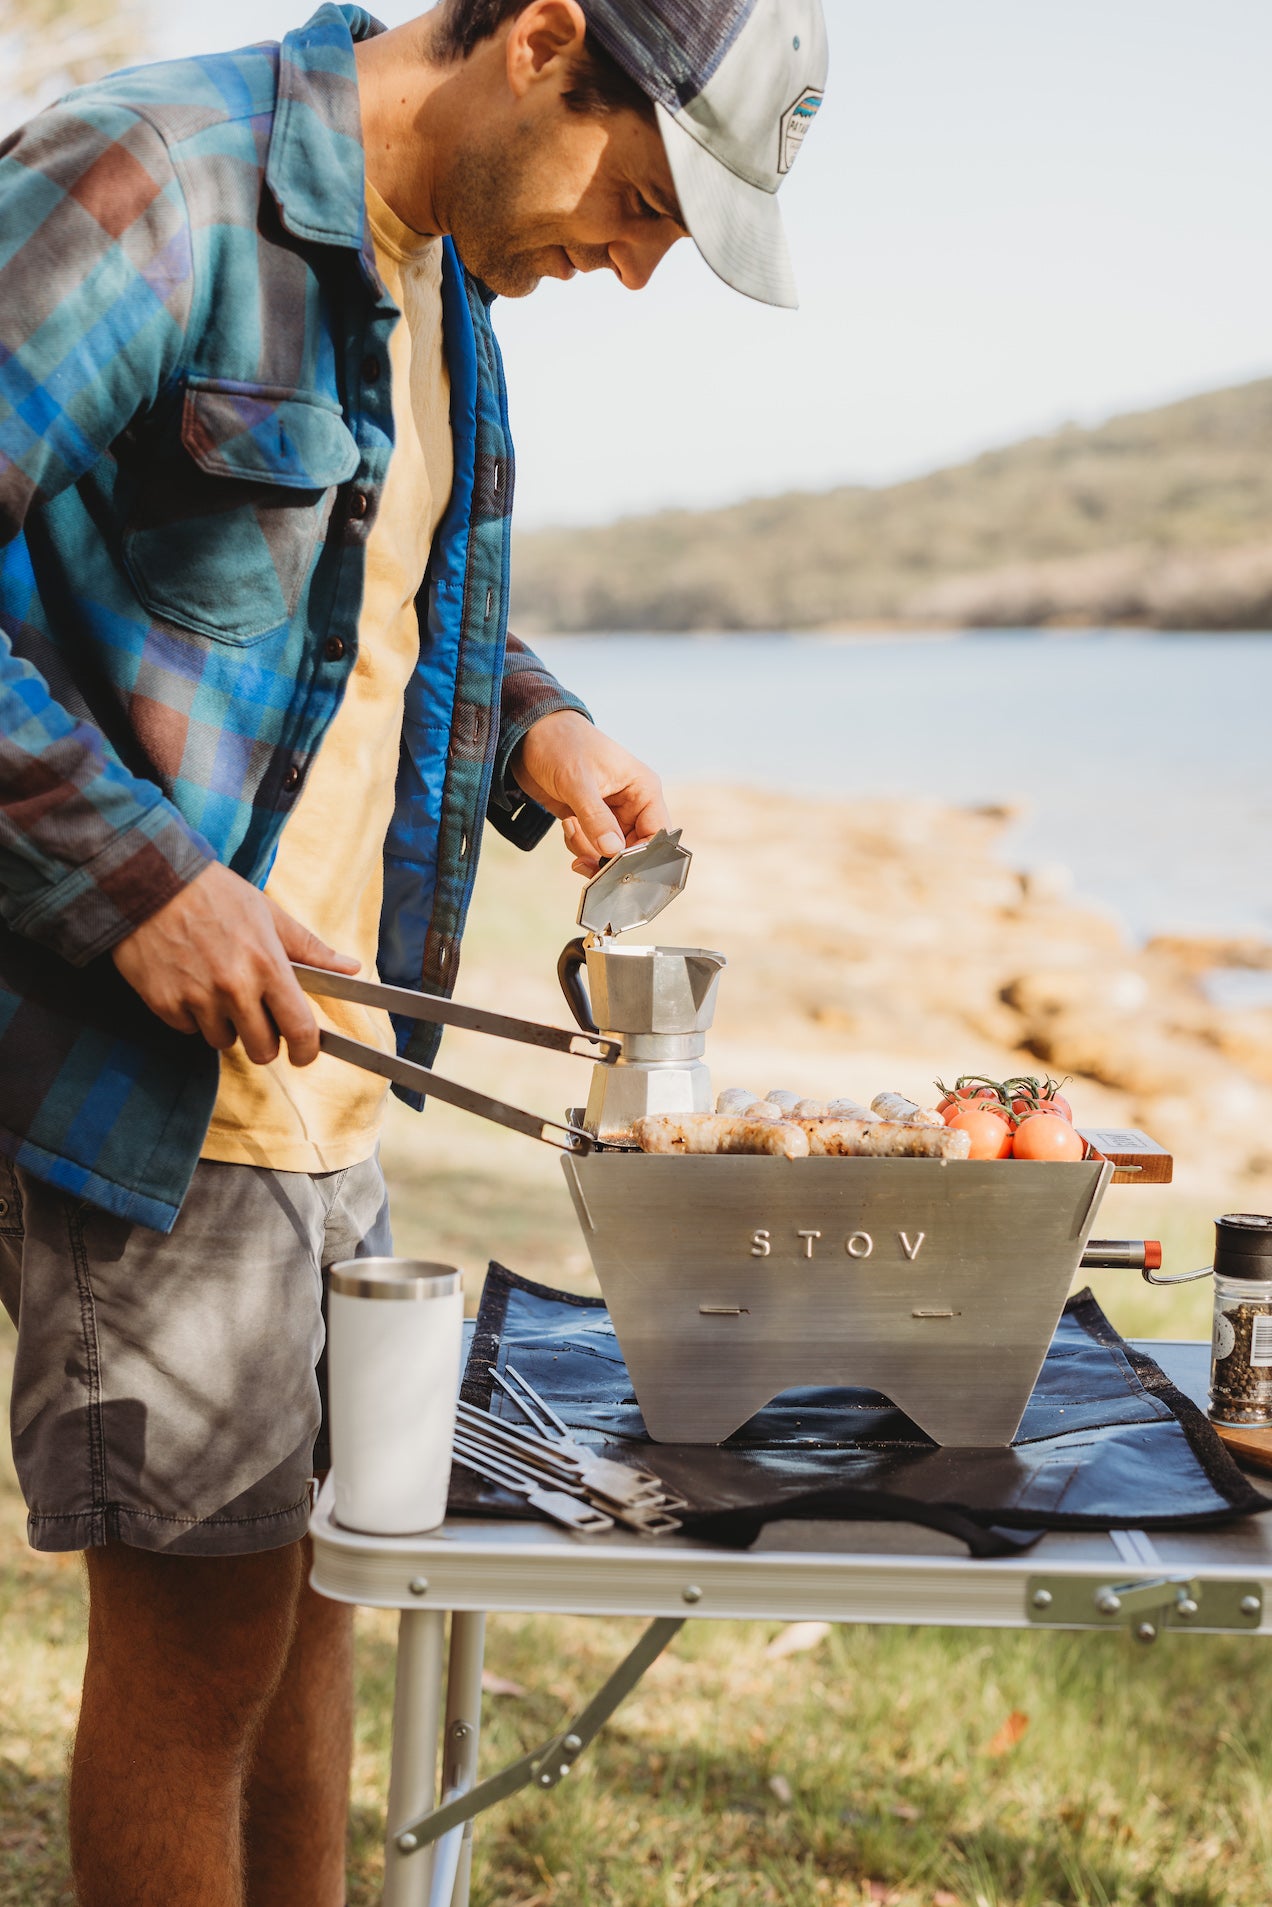 Cooking with a portable bbq on a clifftop or at the lake. The stov bbq is cooking delicious meals with ocean or lake views